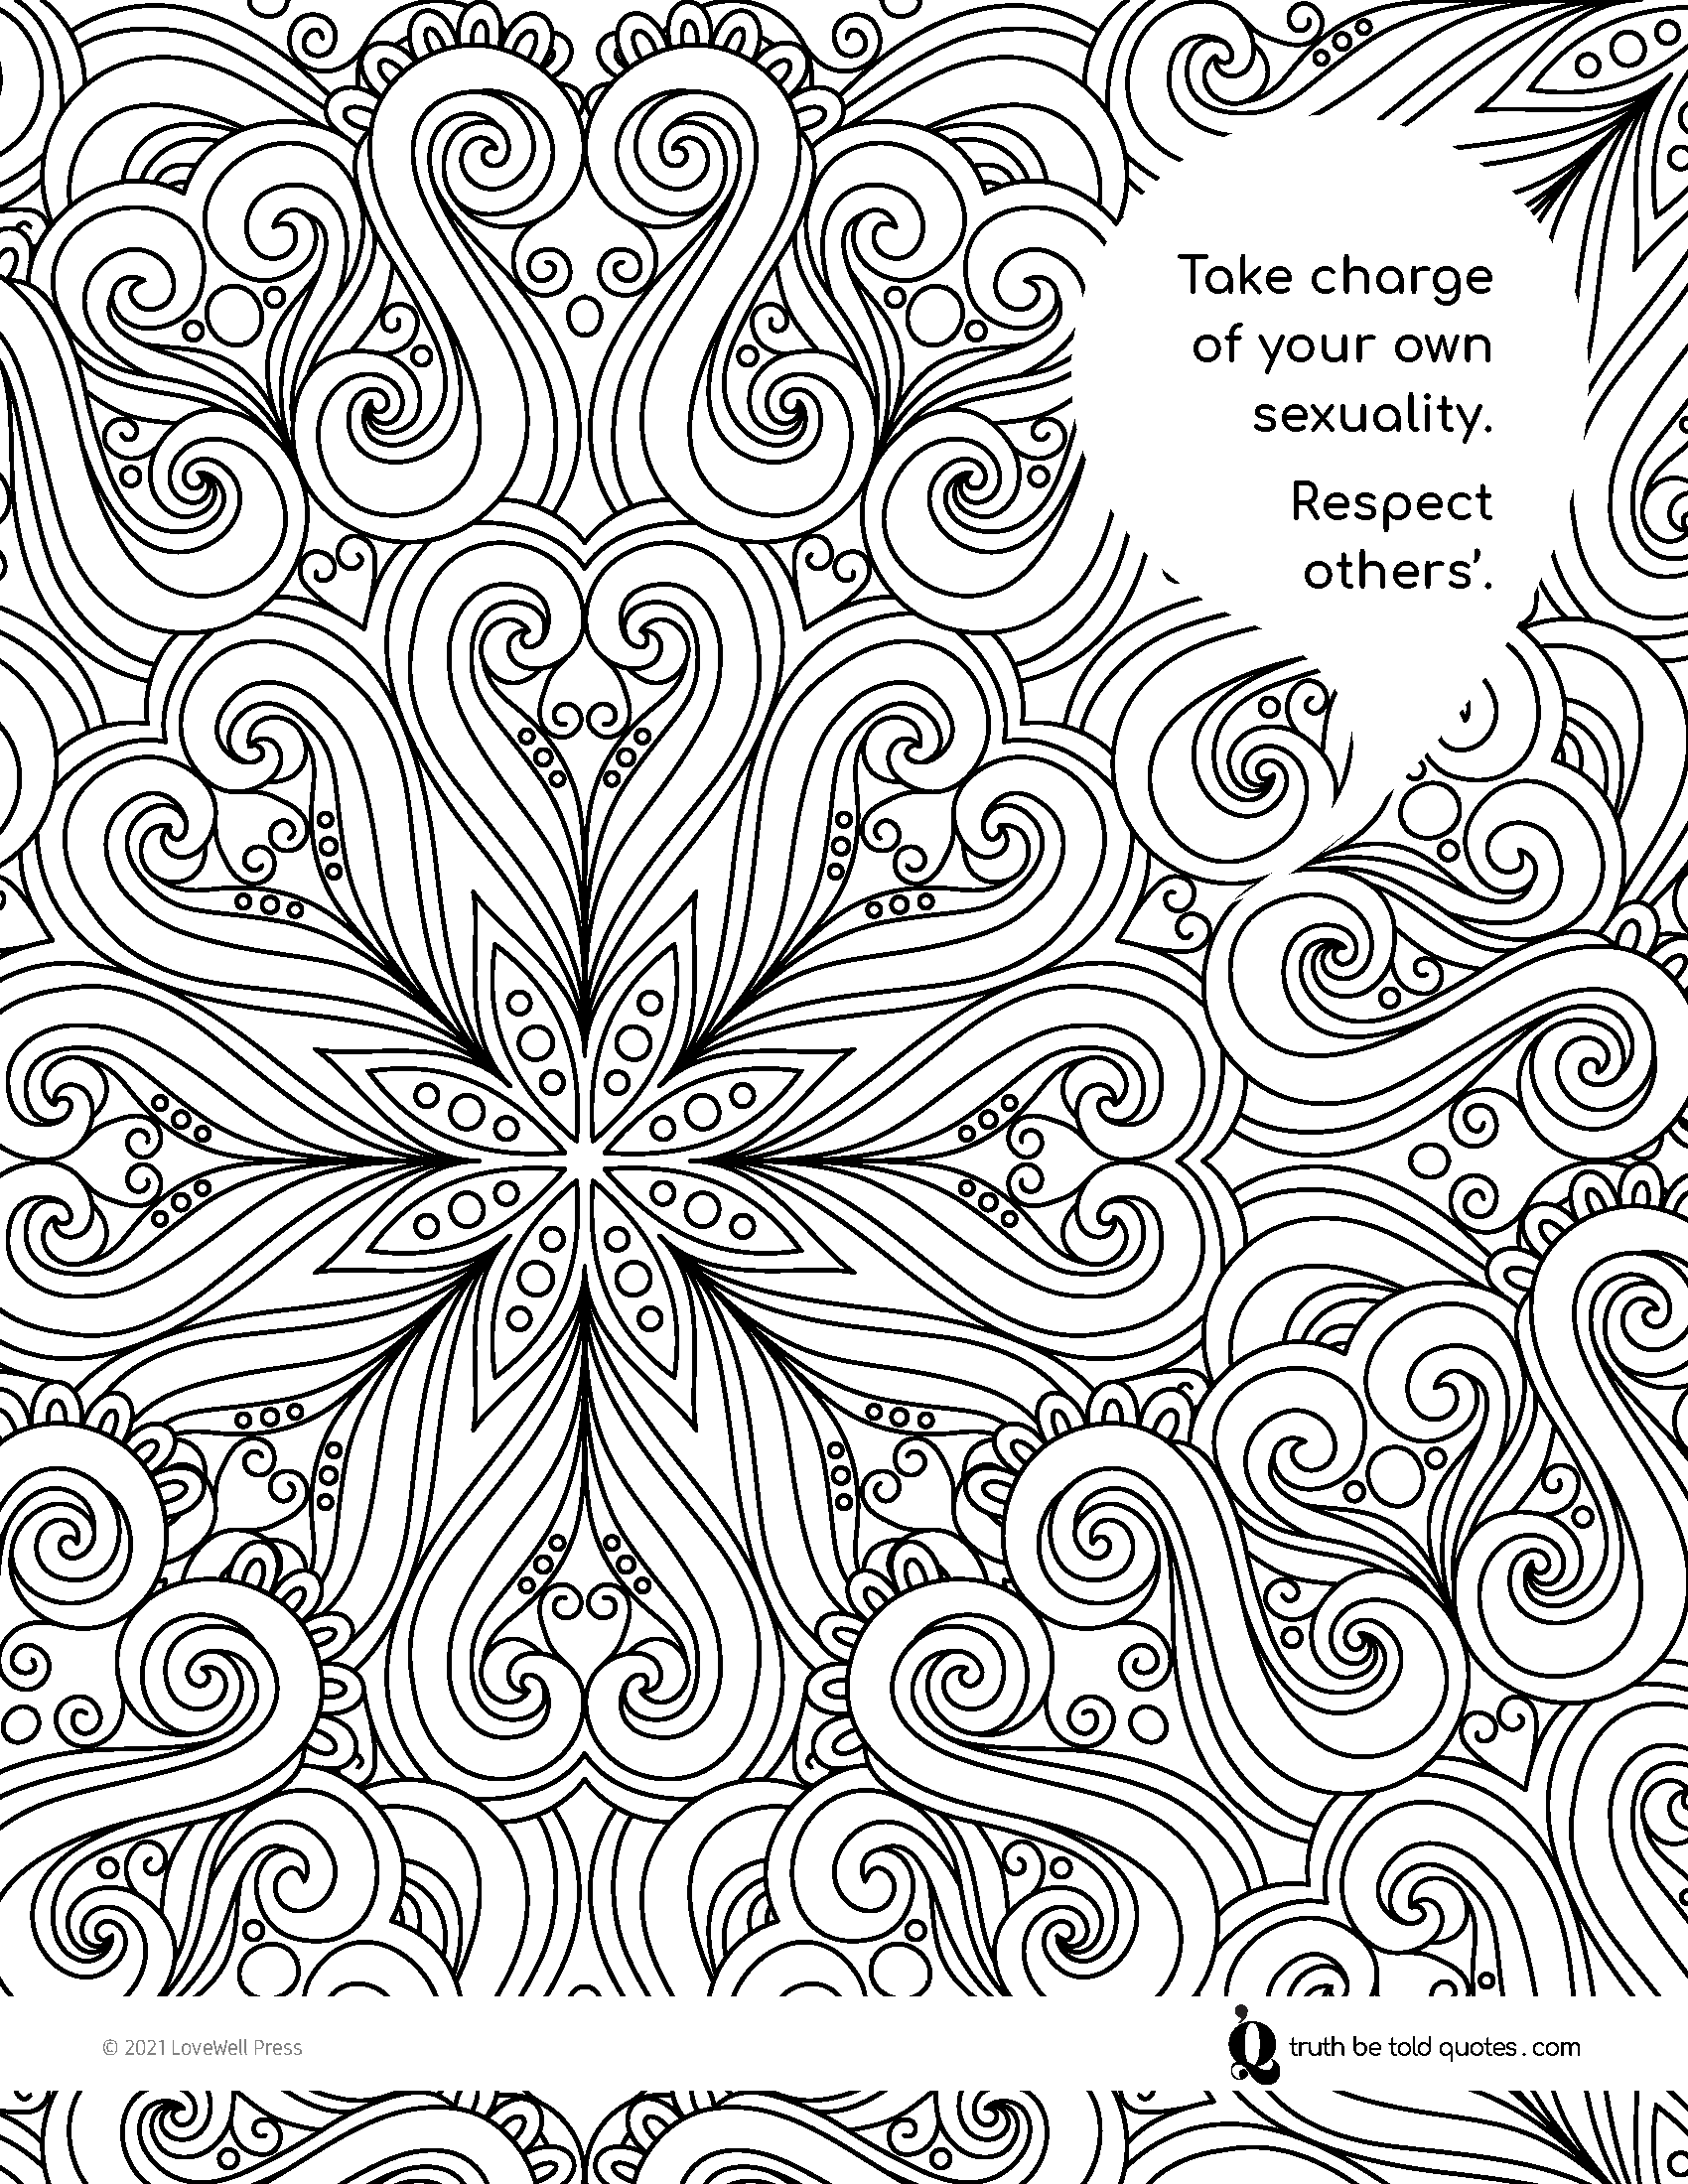 Free coloring page with quote about healthy sexuality with image of zentangle syle swirls